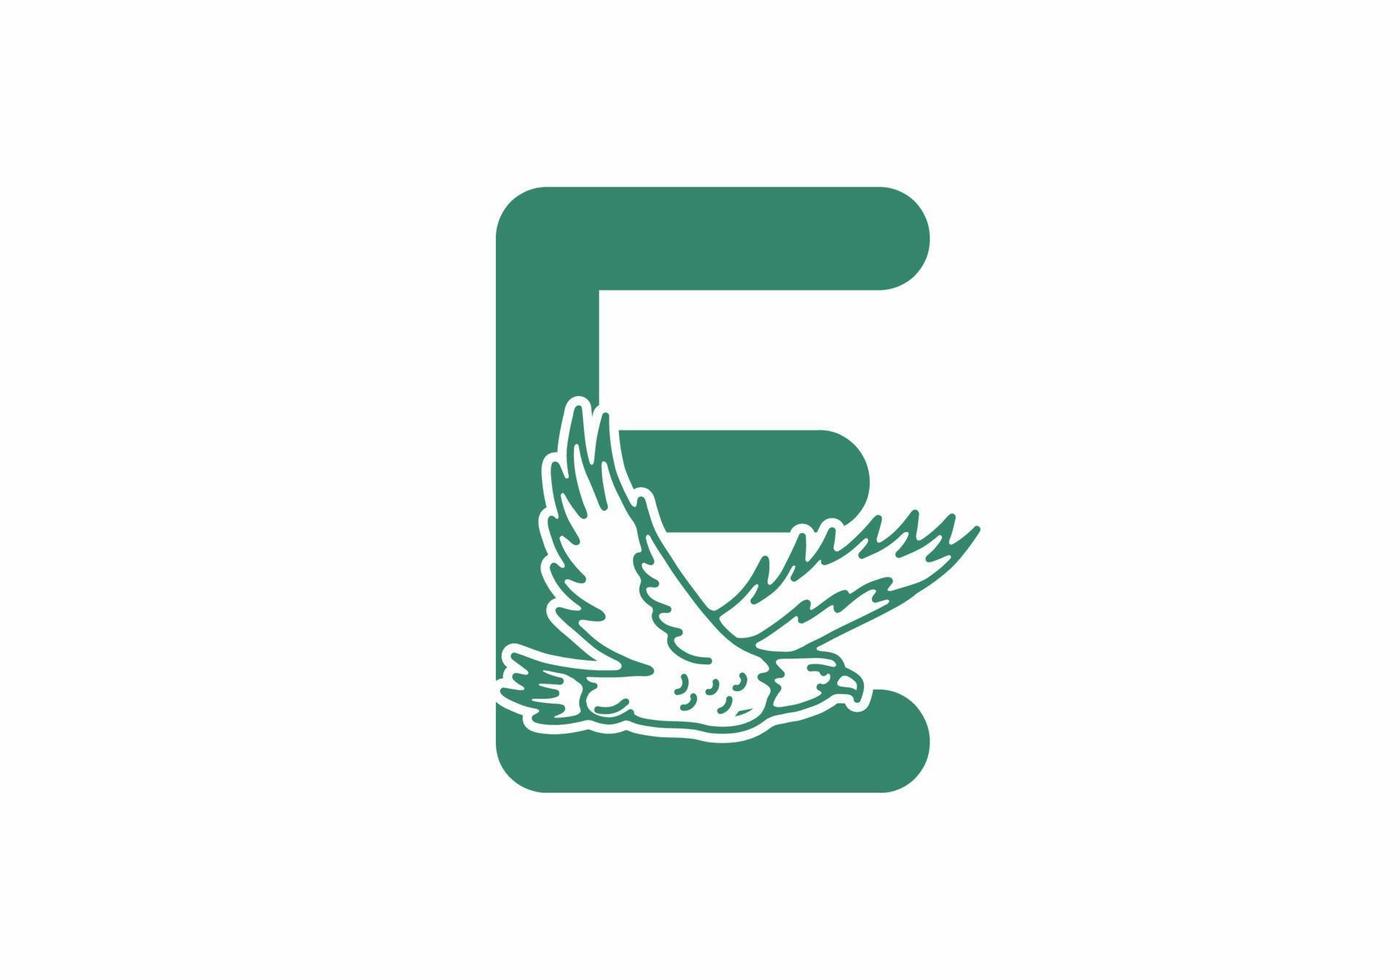 Line art illustration of flying eagle with E initial letter vector